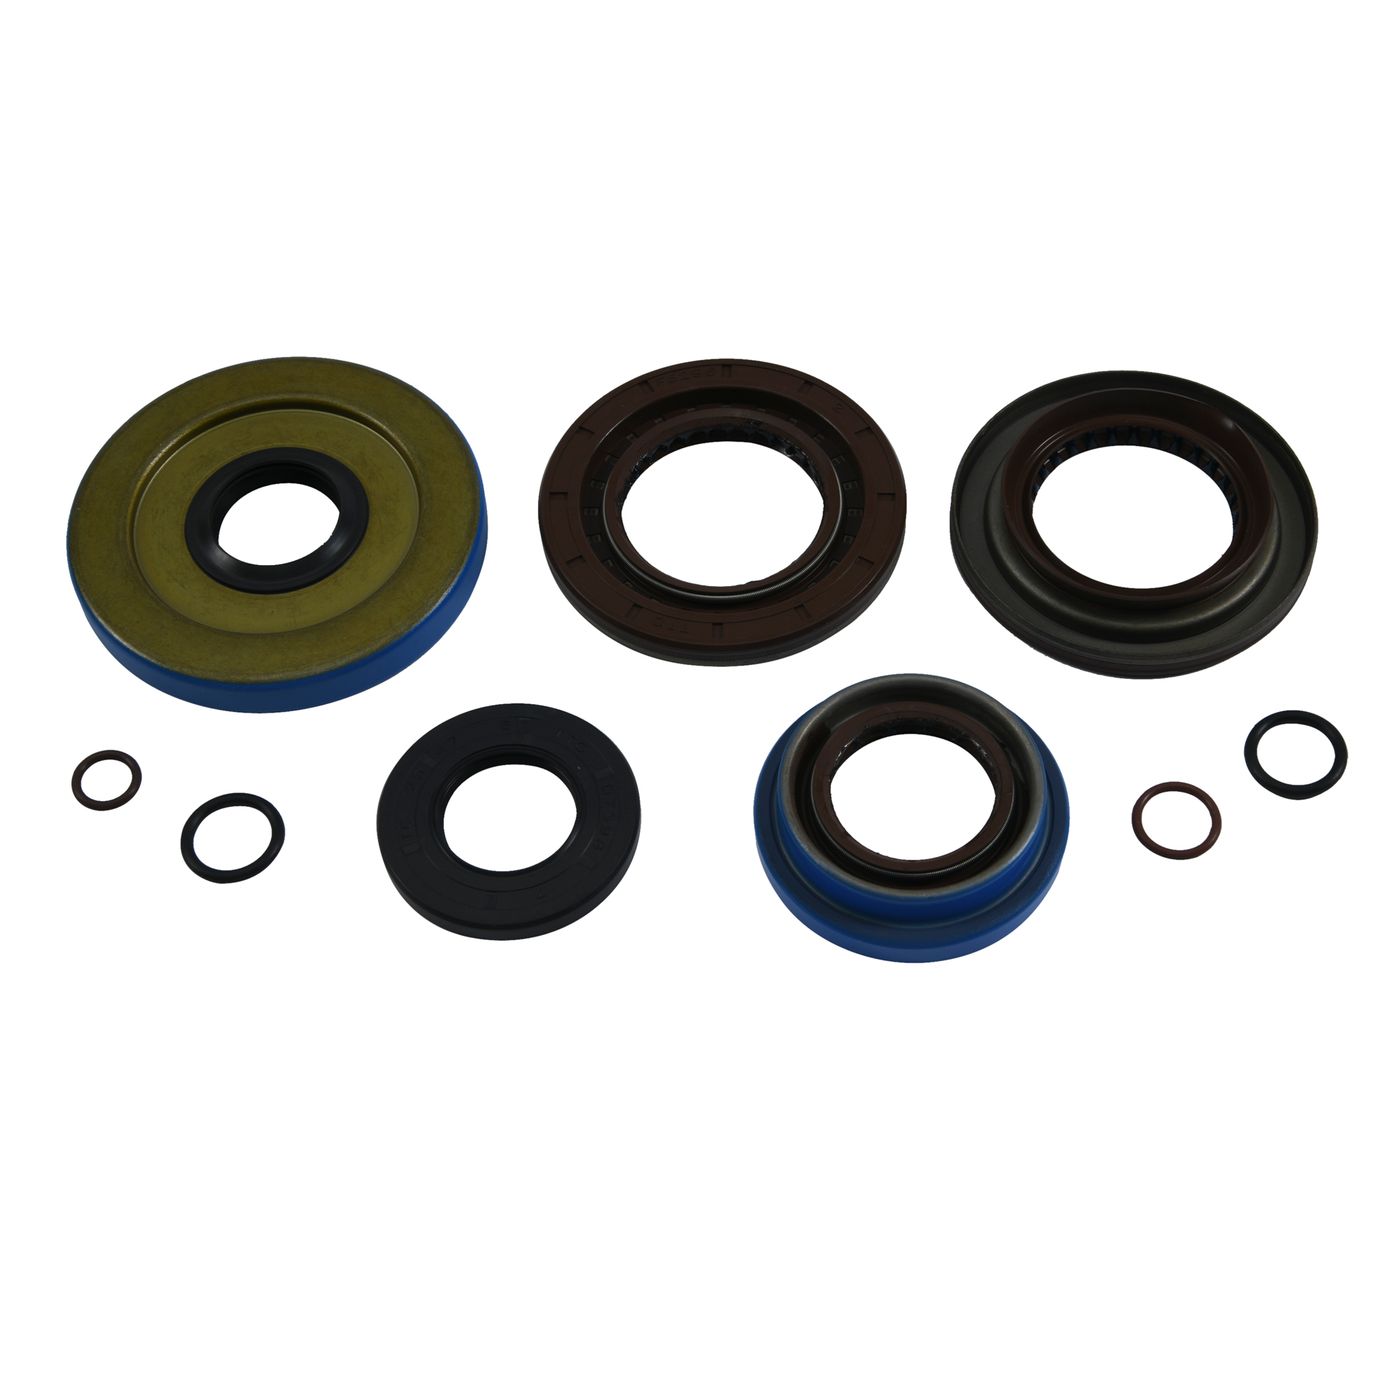 Wrp Diff Seal Kits - WRP252123-5 image